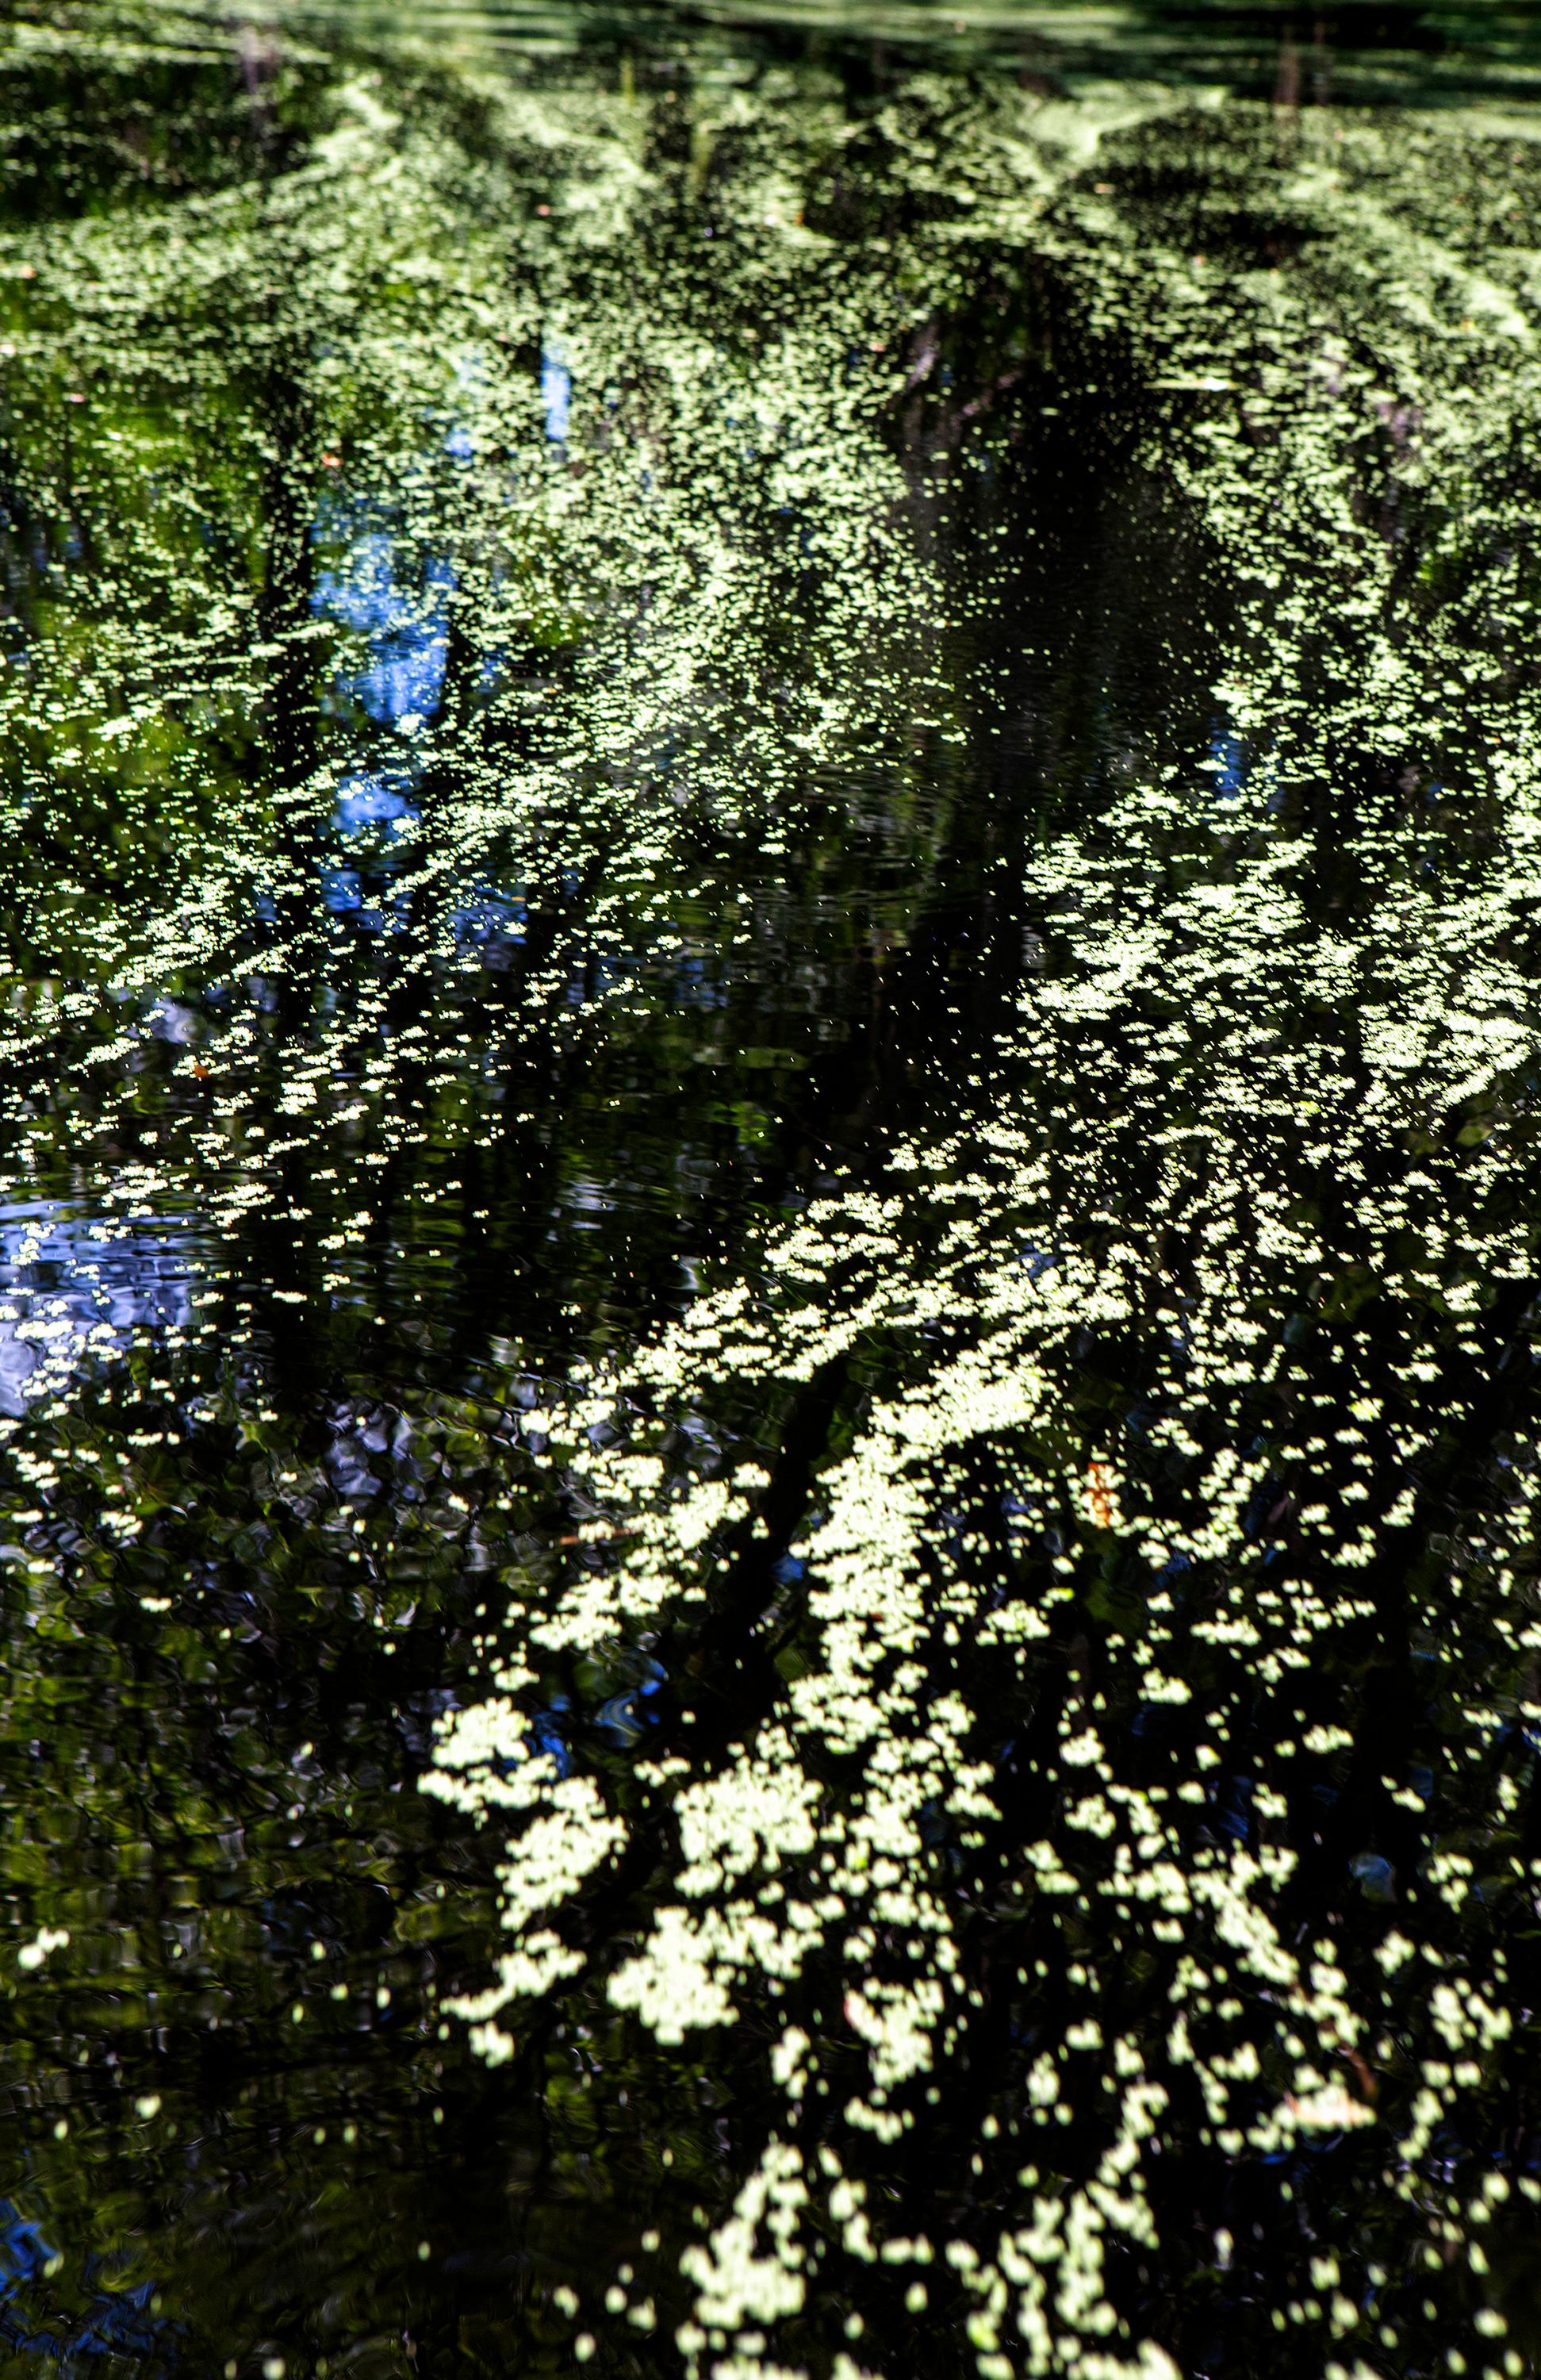 Nature Painting Ebenezer No. 3 - swamp - water - southern photography - Photograph by Cecilia Montalvo & Charlie McCullers